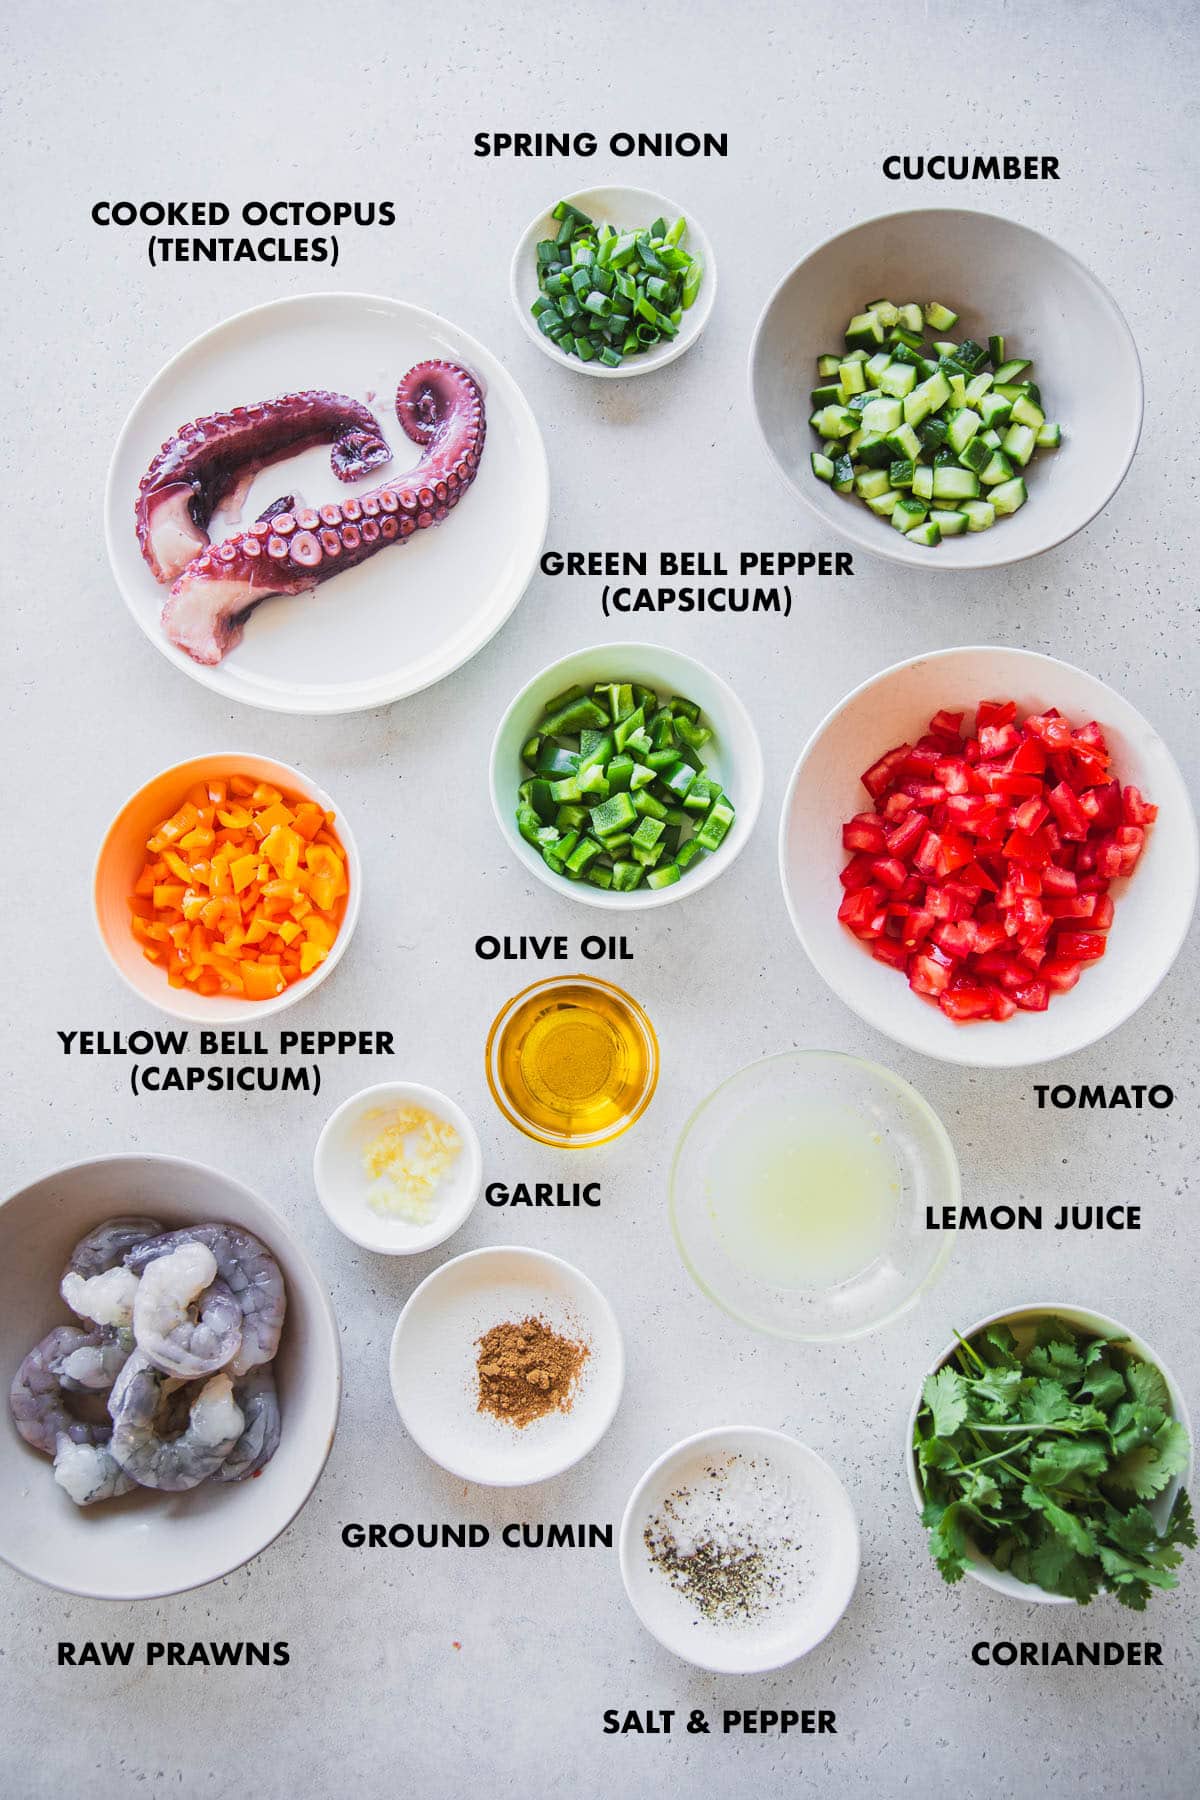 Ingredients for Seafood Pipiranna measured and labeled - cooked octopus, raw prawns, spring onion, cucumber, green capsicum, yellow capsicum, coriander, ground cumin, olive oil, garlic, tomato, salt and pepper.